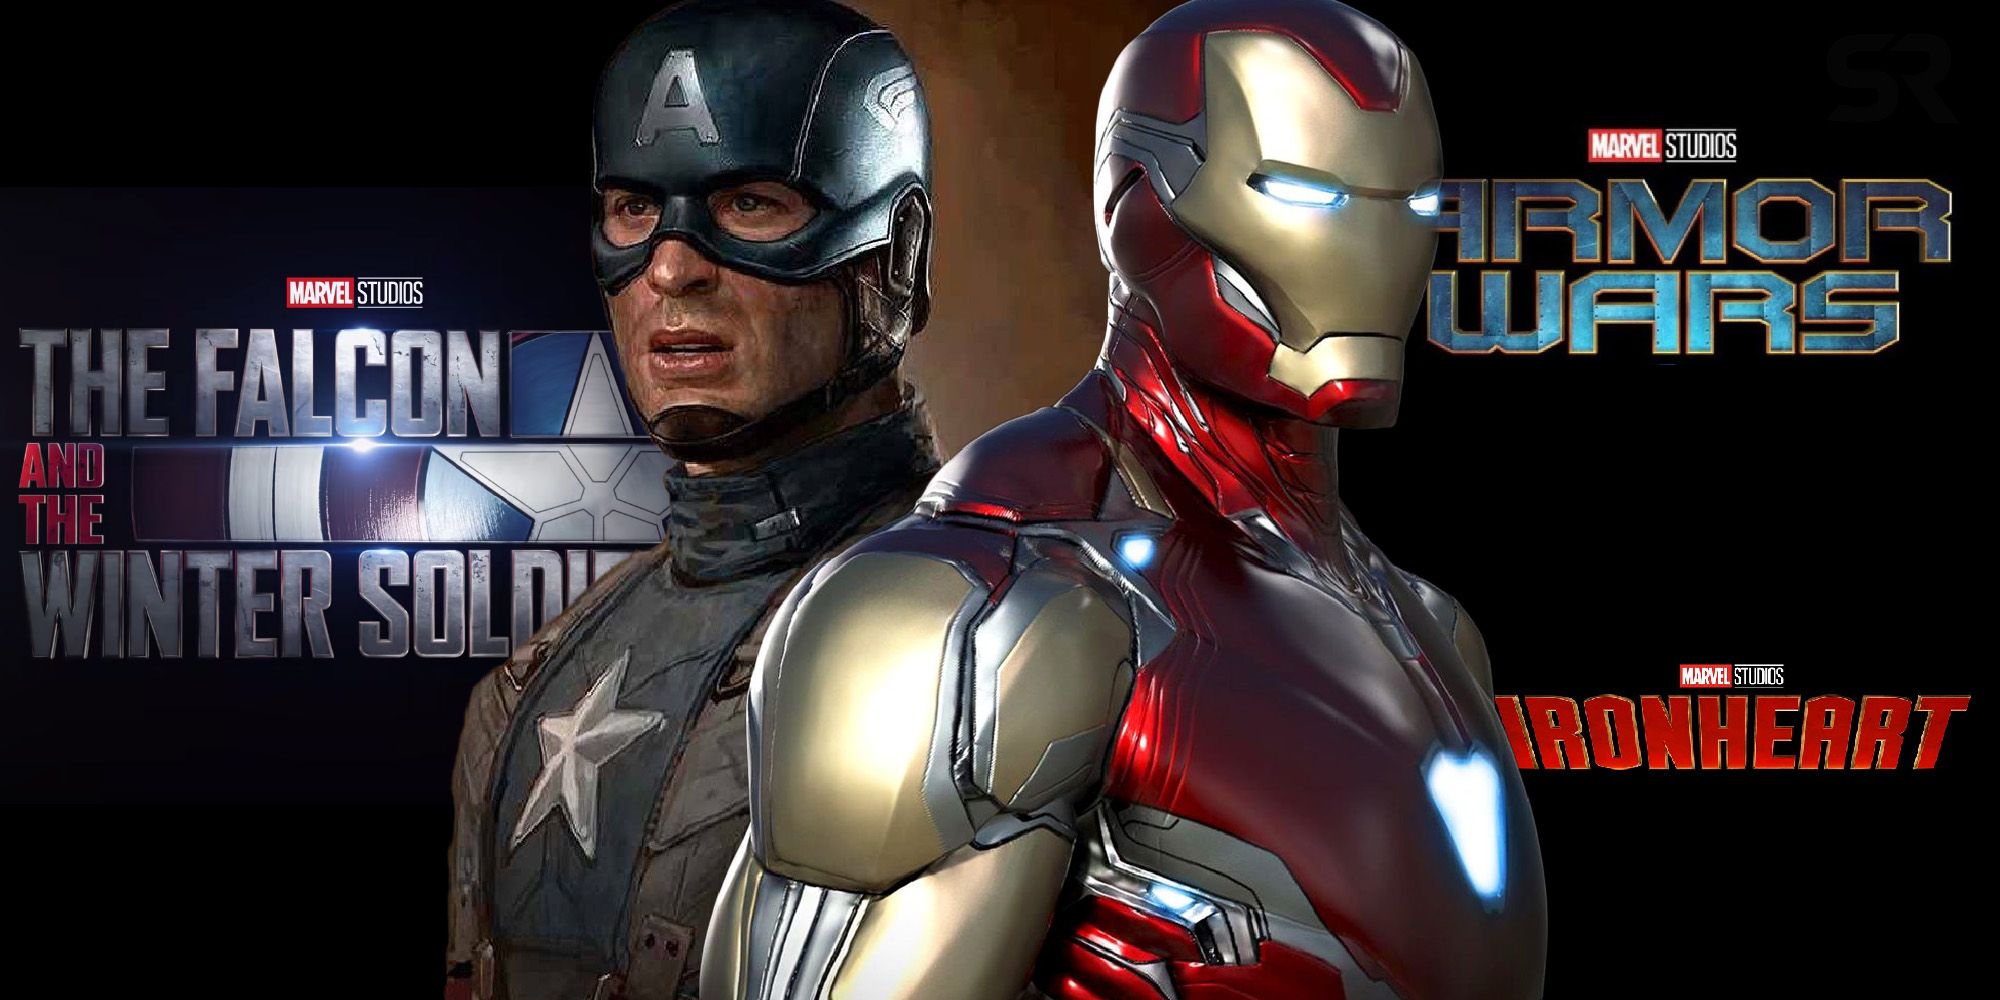 Iron man Captain america Falcon and the winter soldier armor wars iron heart